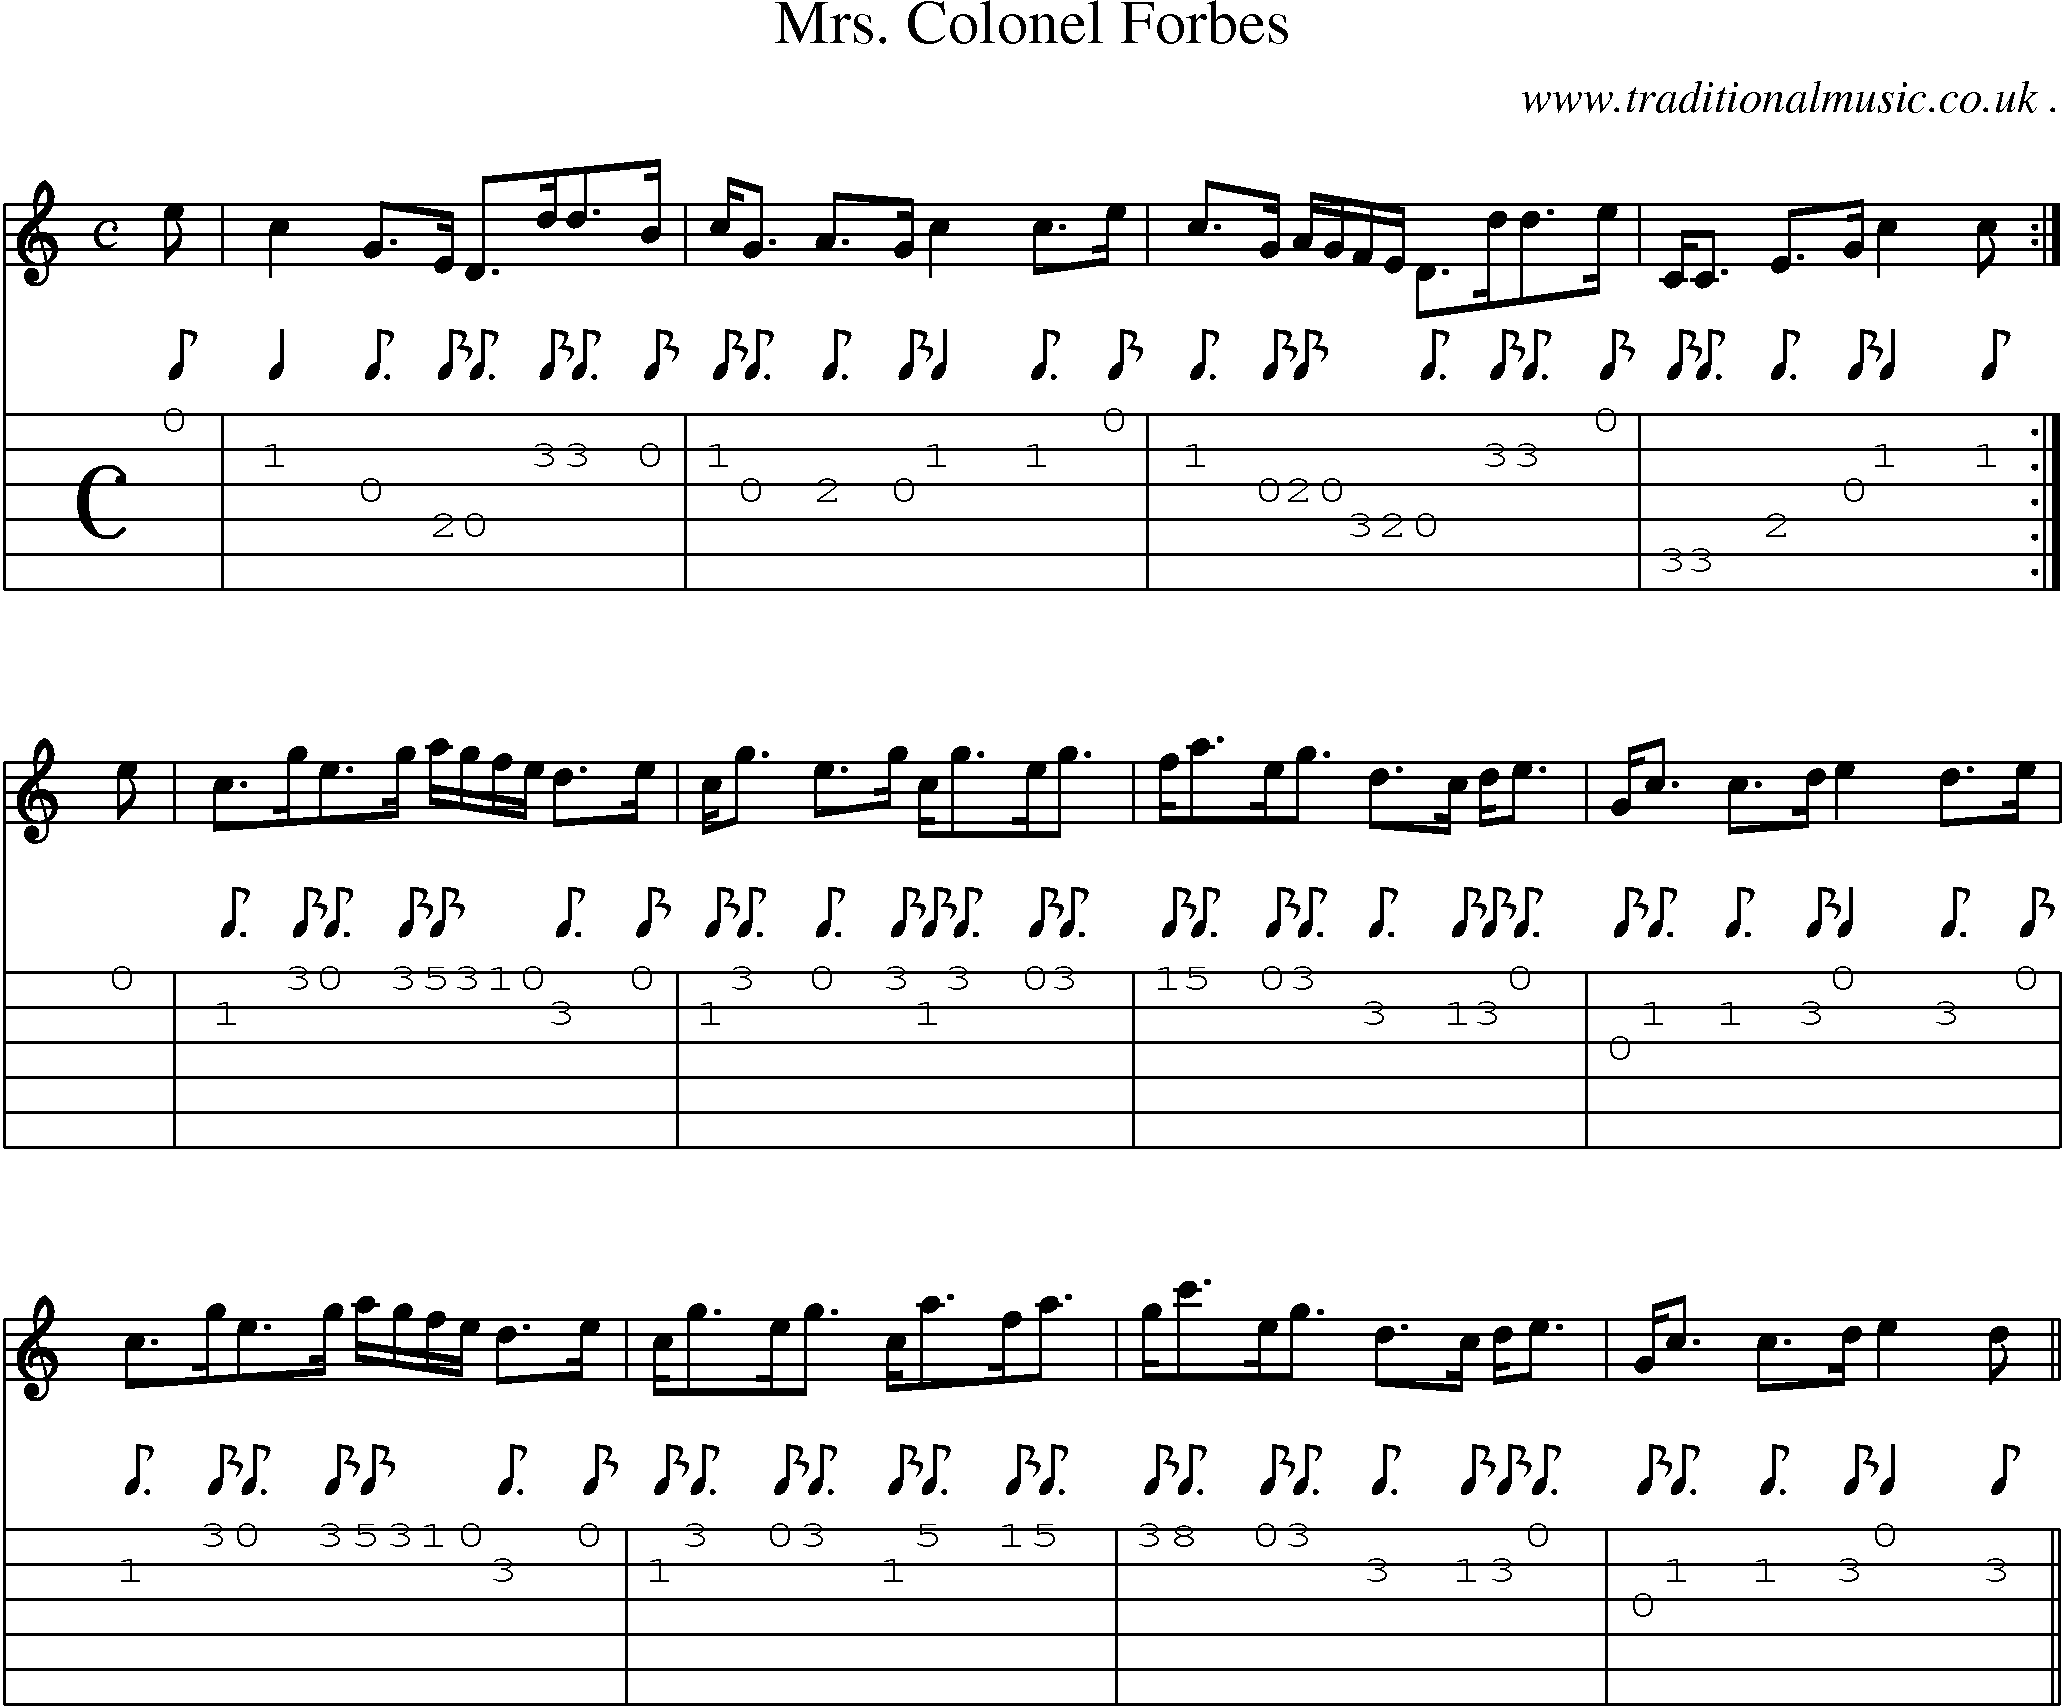 Sheet-music  score, Chords and Guitar Tabs for Mrs Colonel Forbes